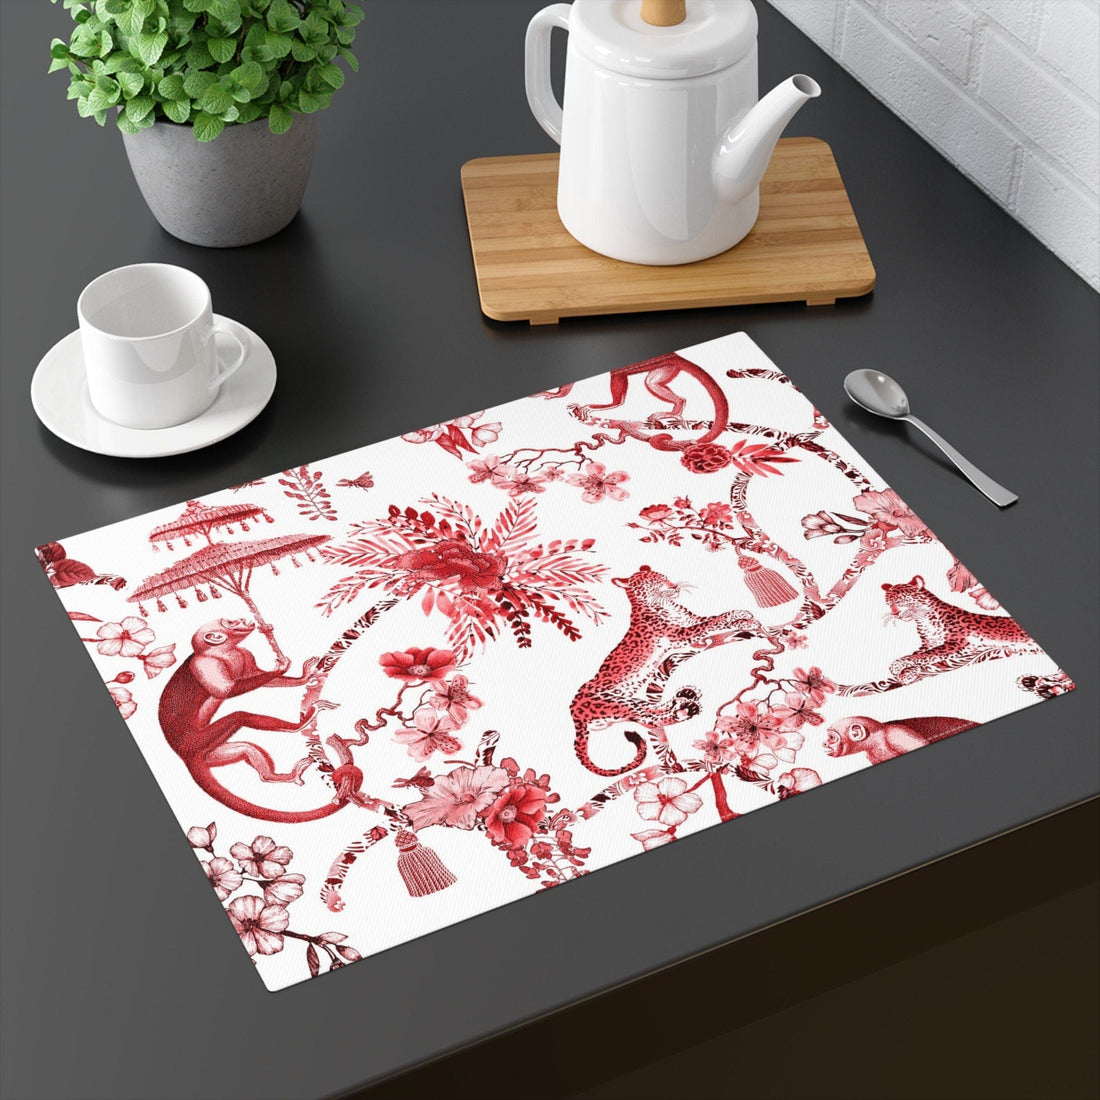 Kate McEnroe New York Chinoiserie Jungle Botanical Toile Placemats, Red, White Chinoiserie Floral Table Linens , Country Farmhouse Dining Table Decor - 131582623Placemats24821429030747504889